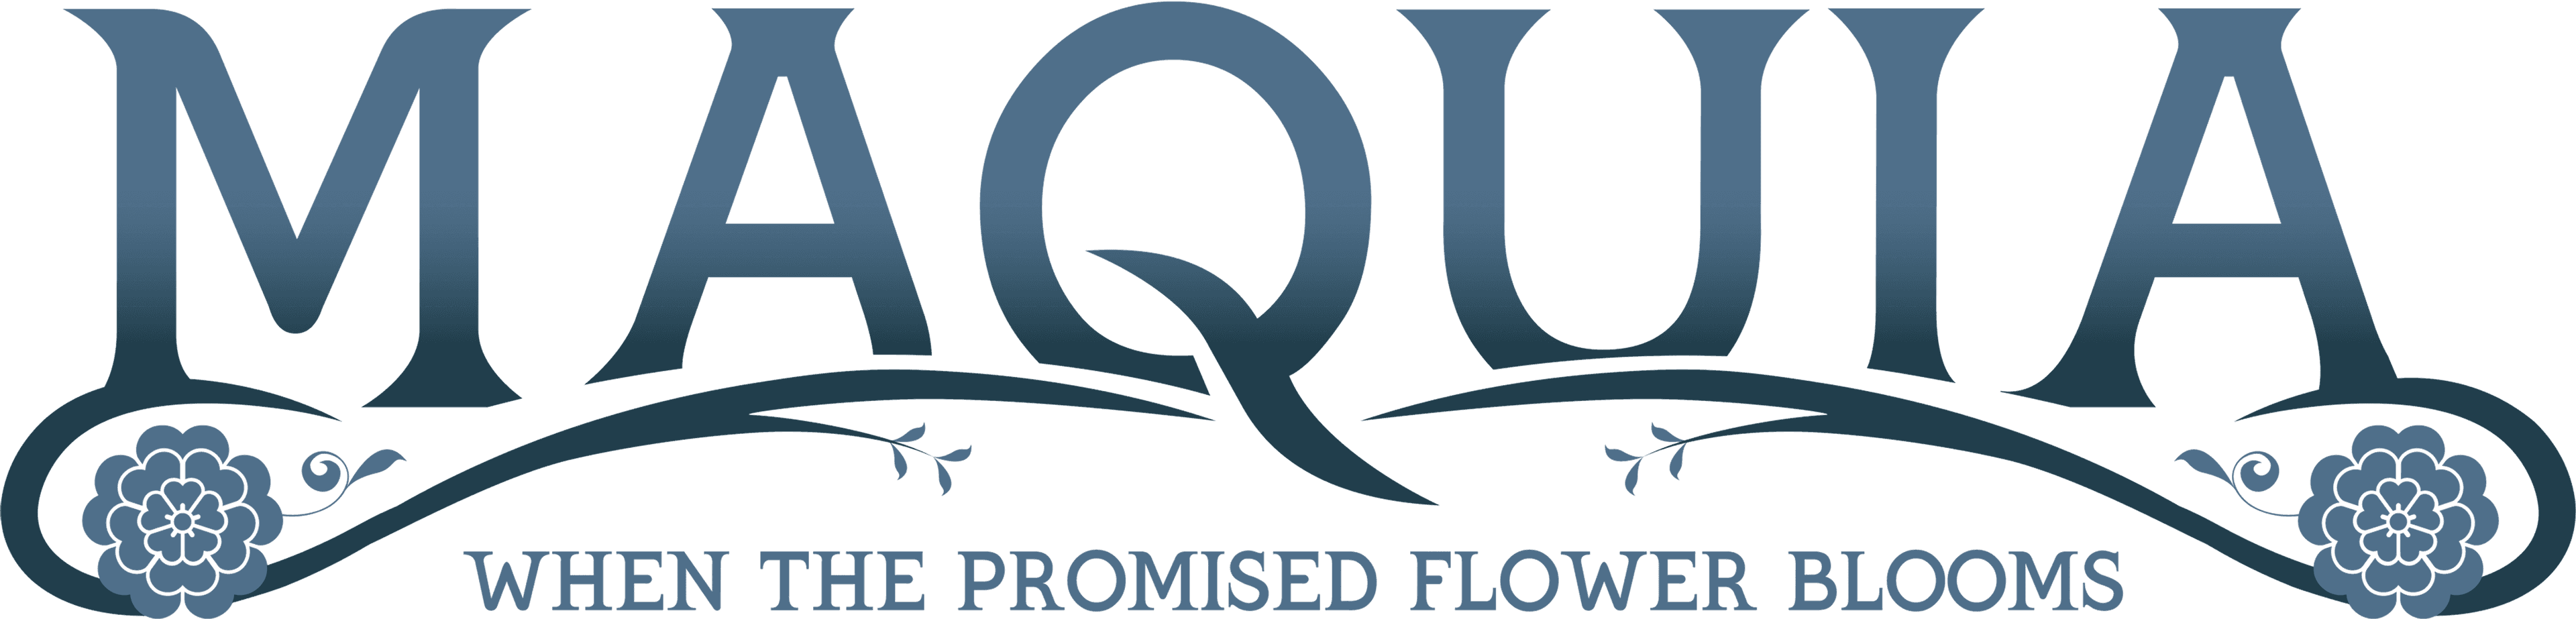 Maquia: When the Promised Flower Blooms logo